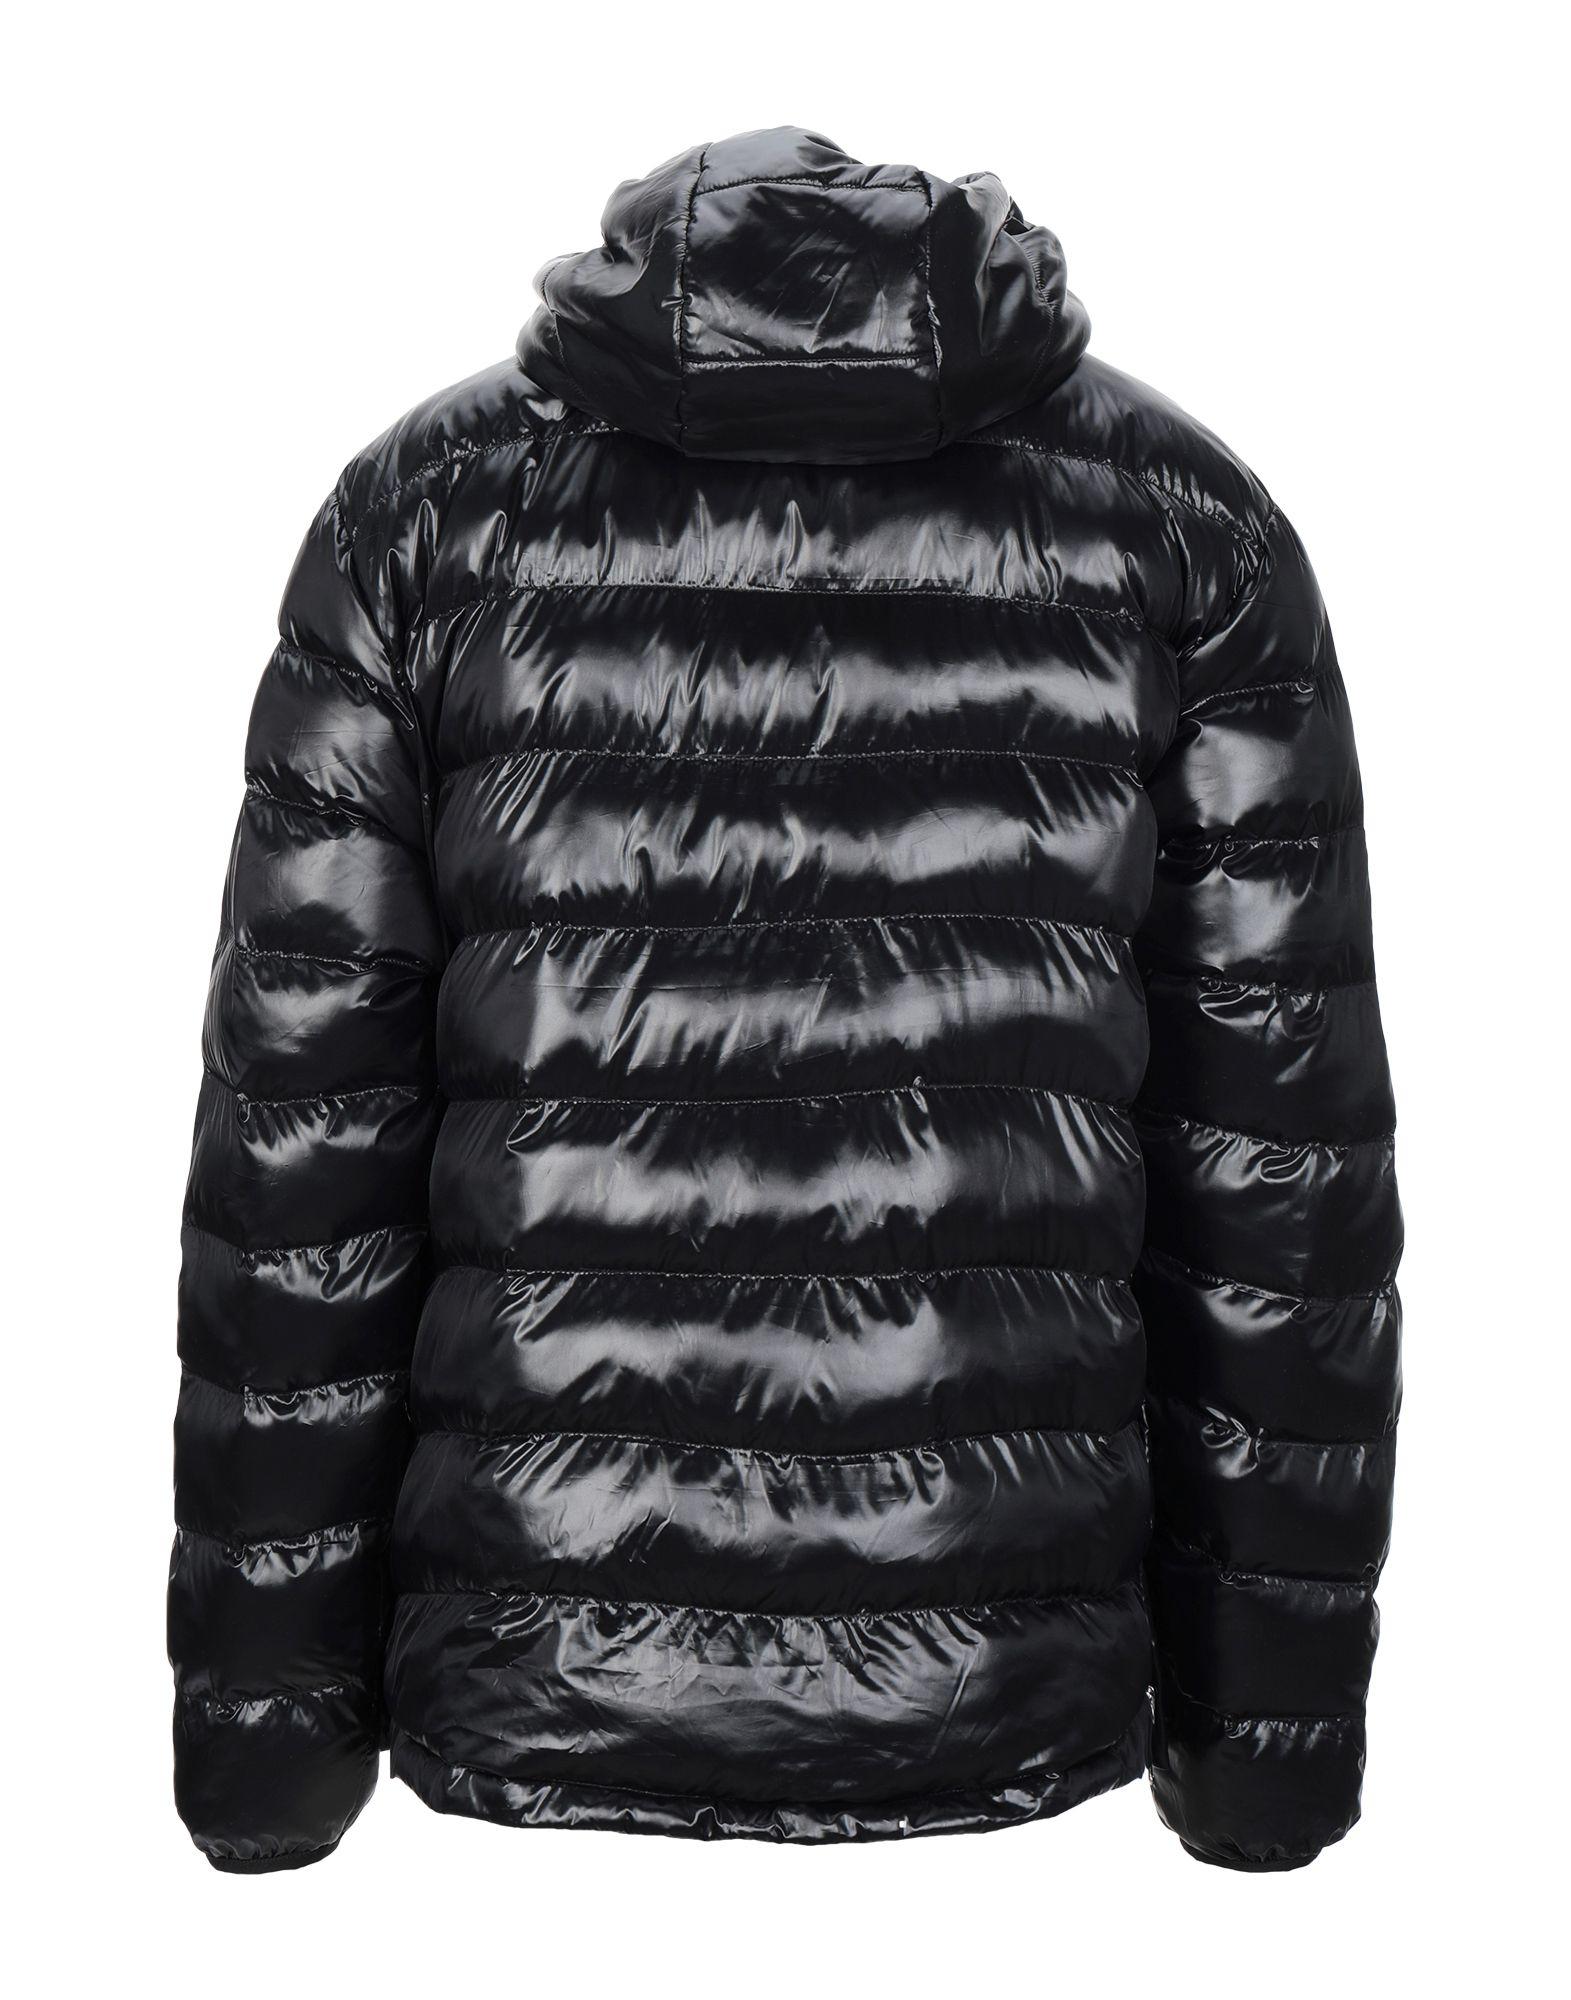 The Very Warm Synthetic Down Jacket in Black for Men - Lyst